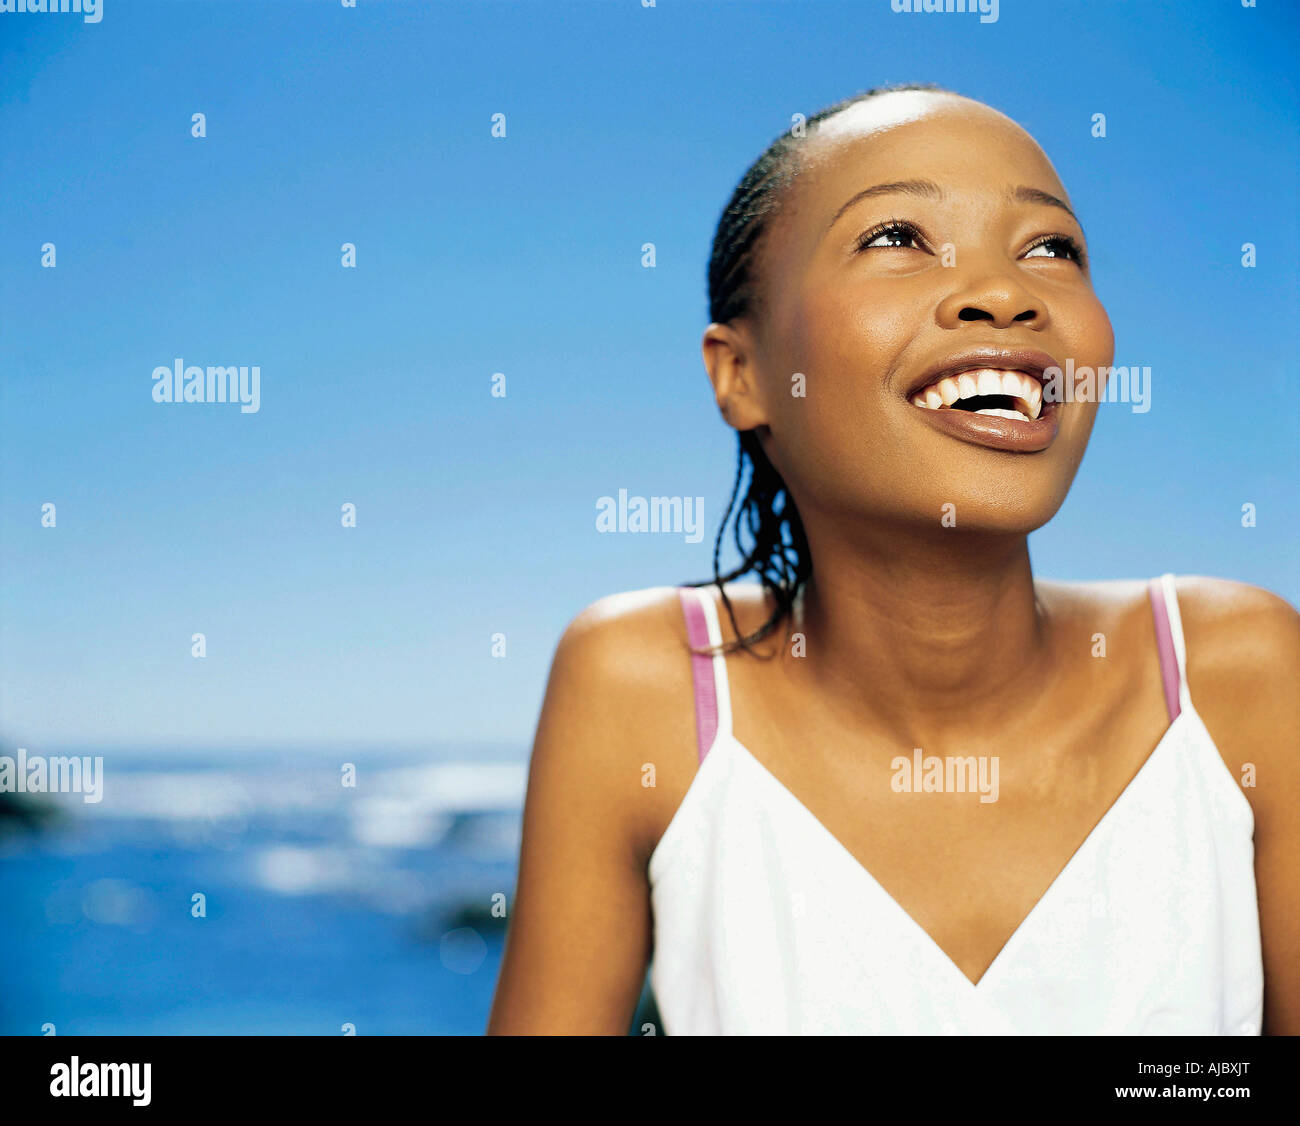 Portrait of an African Woman on the Beach Stock Photo